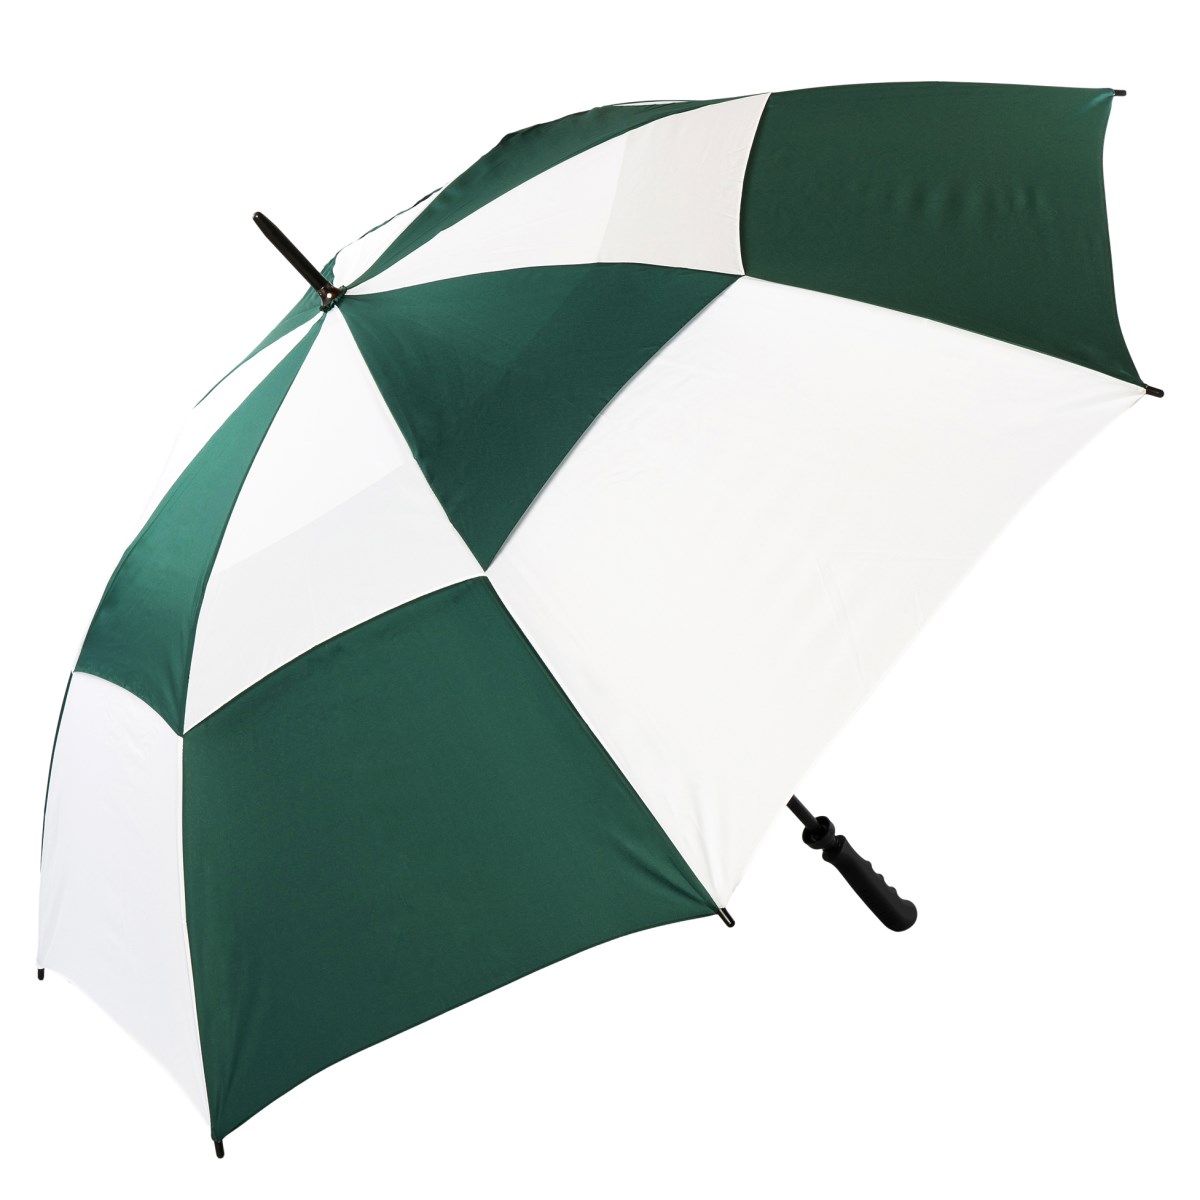 Green & white vented golf umbrella, completely windproof